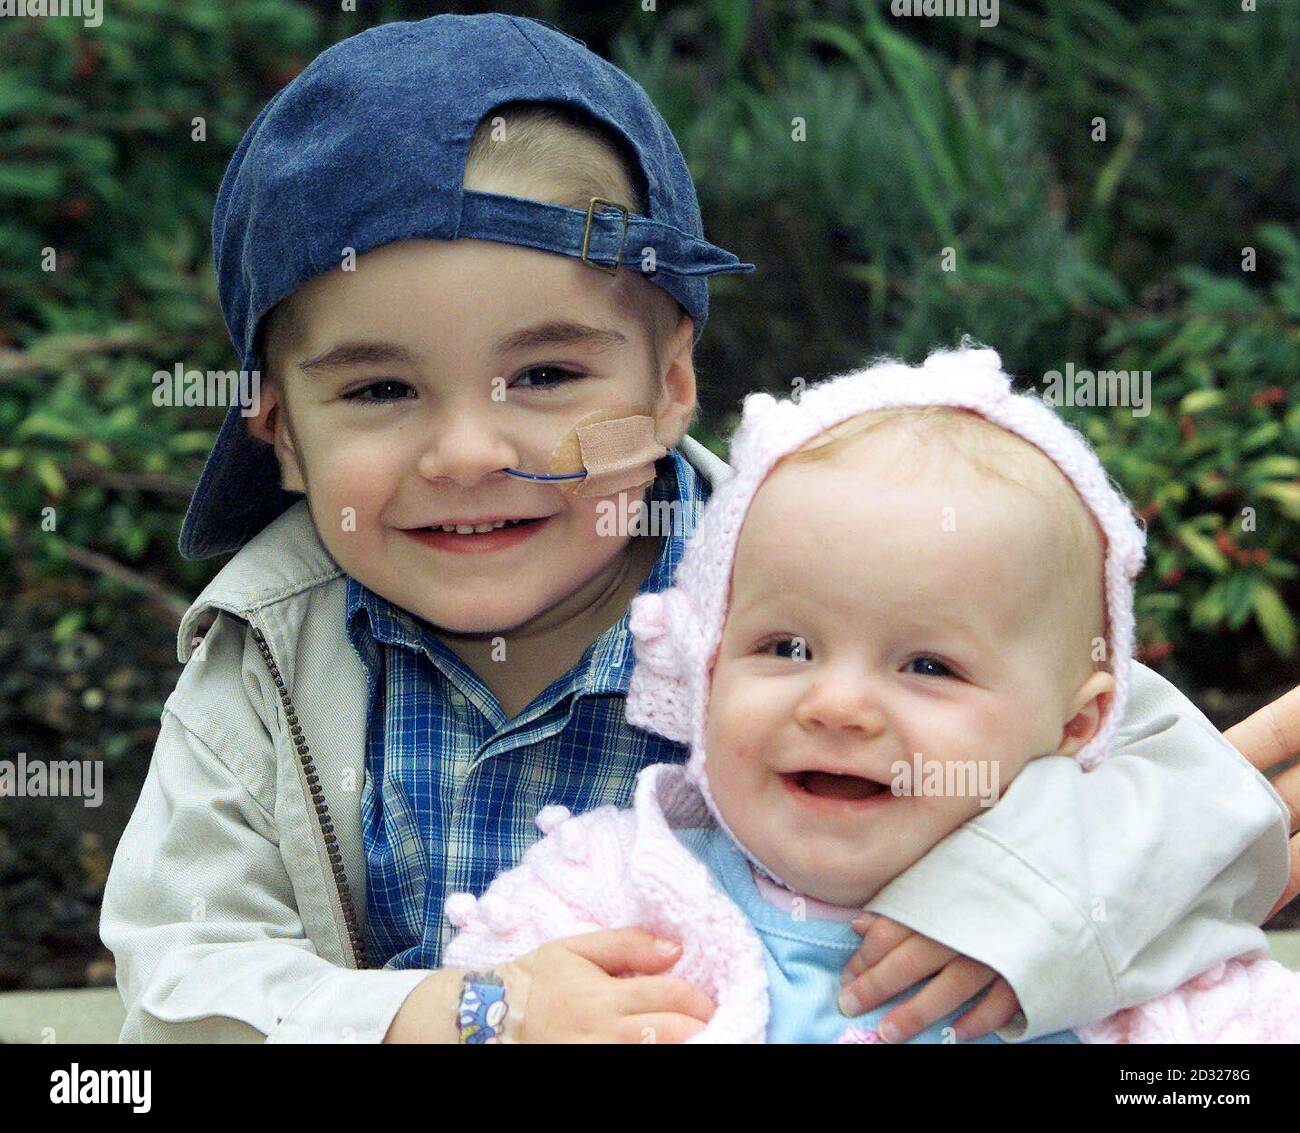 Tom Stretch, three, hugs his ten month-old sister, Hannah, who helped cure him of a potentially fatal disease, in Newcastle upon Tyne. * ..... Tom, from Mancot, Deeside, north Wales, was born with a defect of his white blood cells known as chronic granulomatous disease which left him unable to fight off germs, and was only cured when doctors at Newcastle General Hospital's specialist children's bone marrow transplant unitgave him a tranfusion of cord blood cells, harvested from the placenta of his mother, Joanne, shortly after she gave birth to Hannah. Doctors think that this is the first Stock Photo